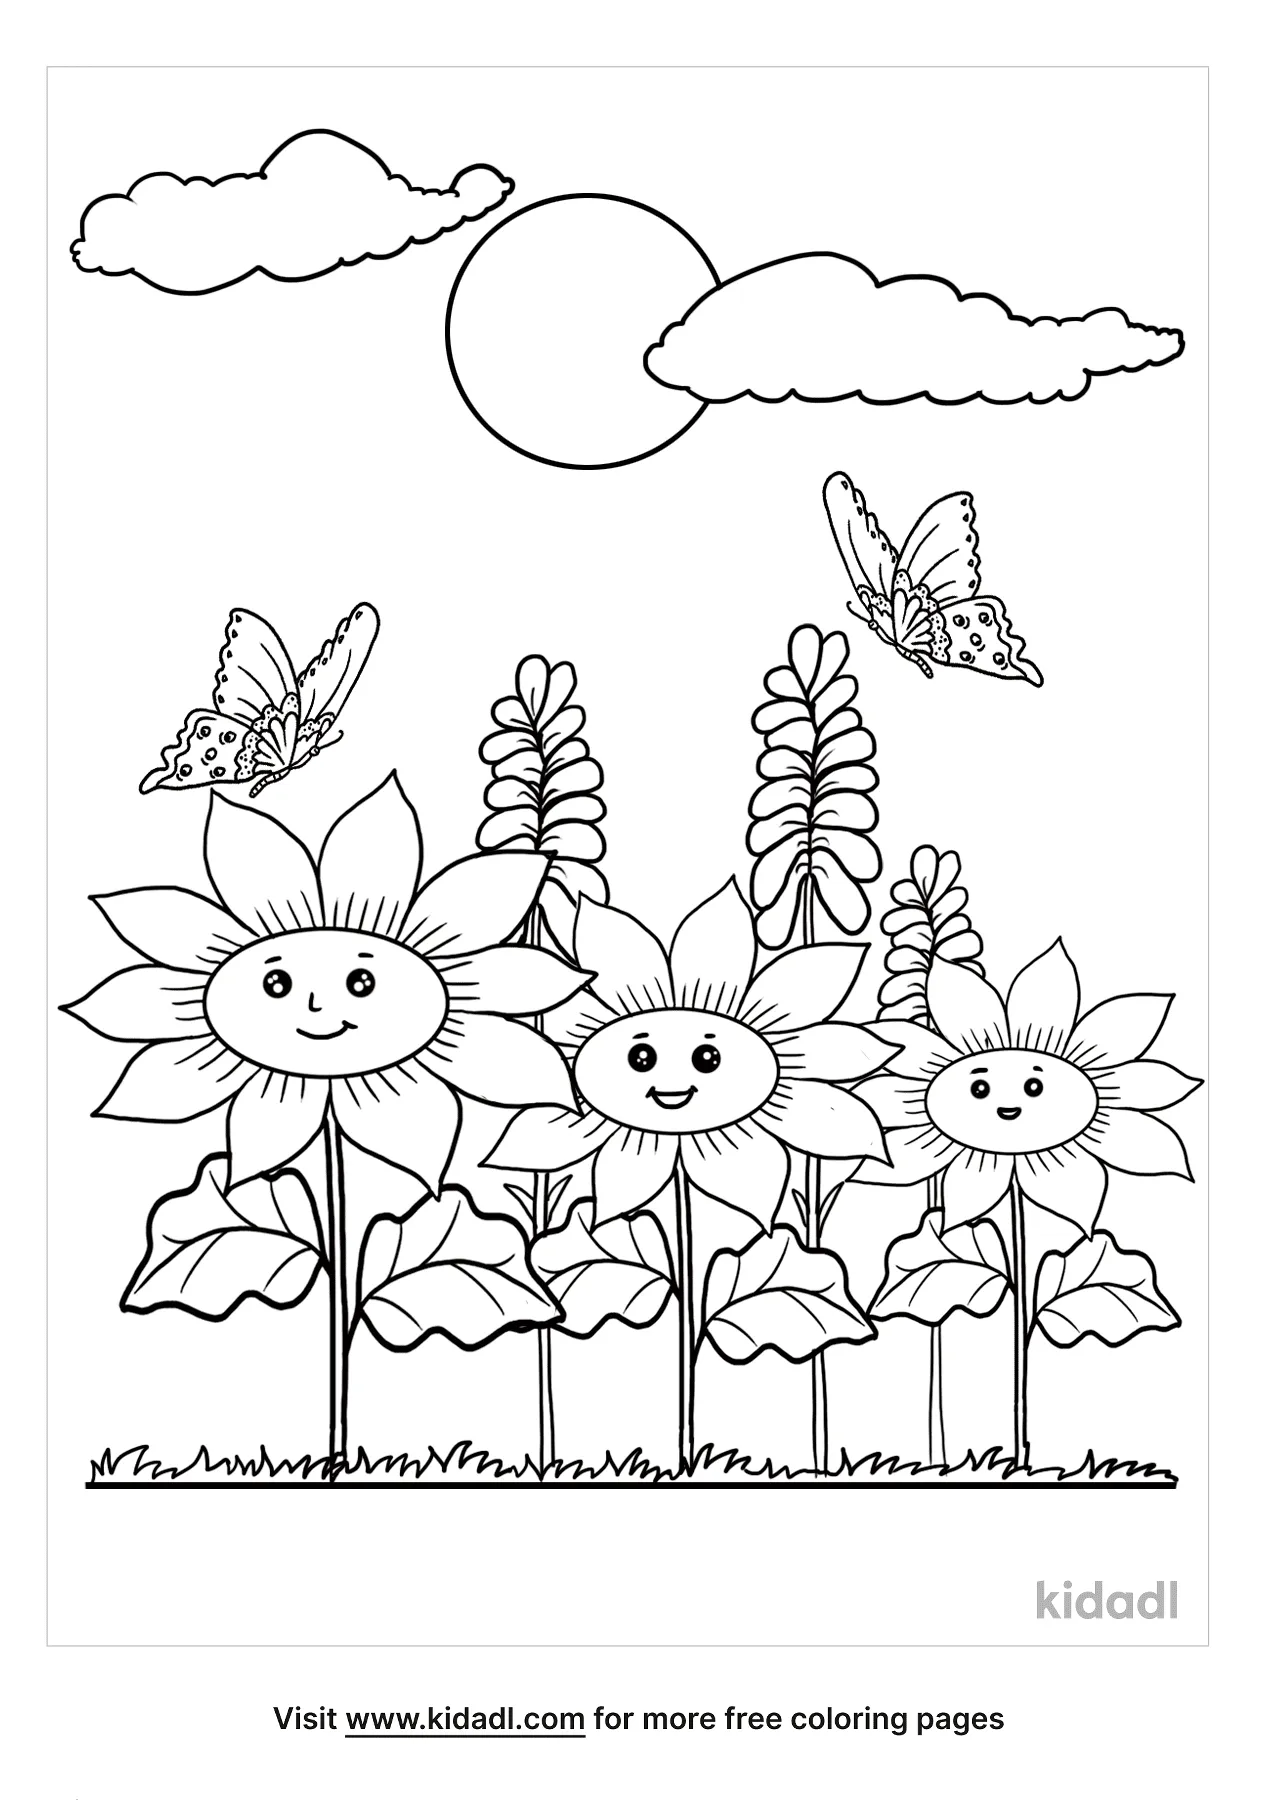 Flower Garden Coloring Page   Free Flowers Coloring Page   Kidadl